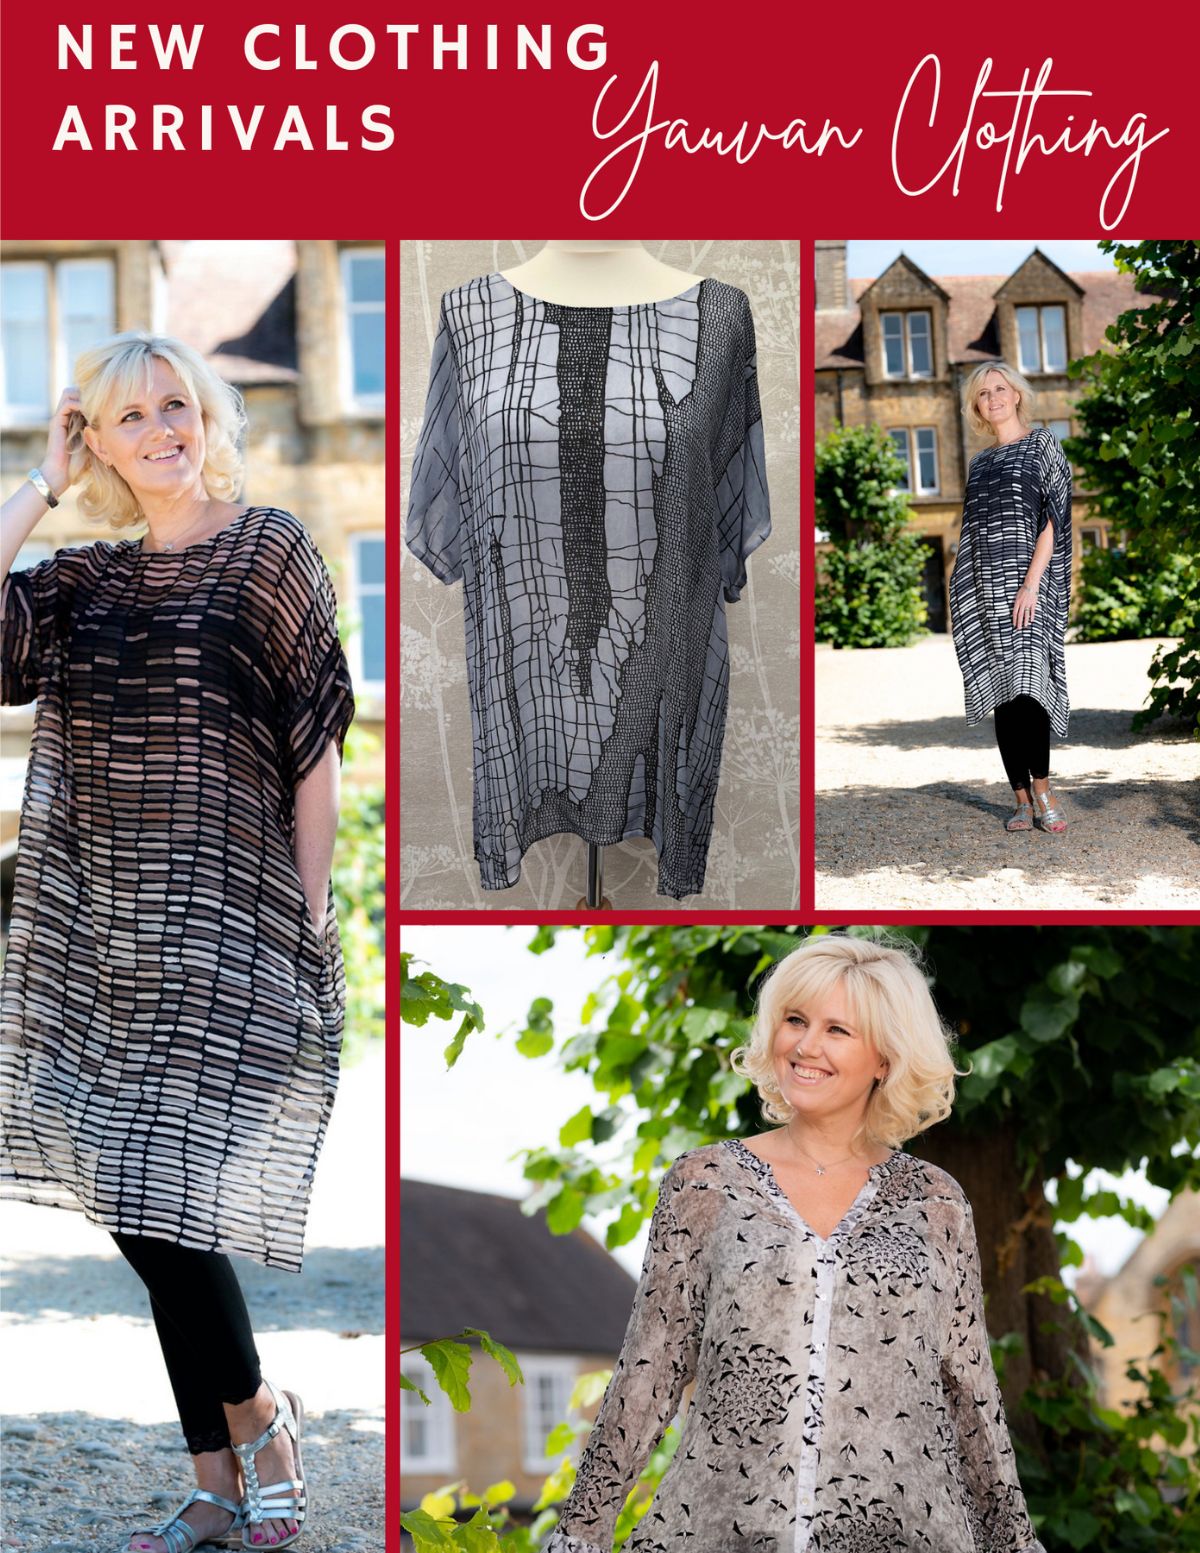 New Clothing Arrivals at Willow Gift & Home